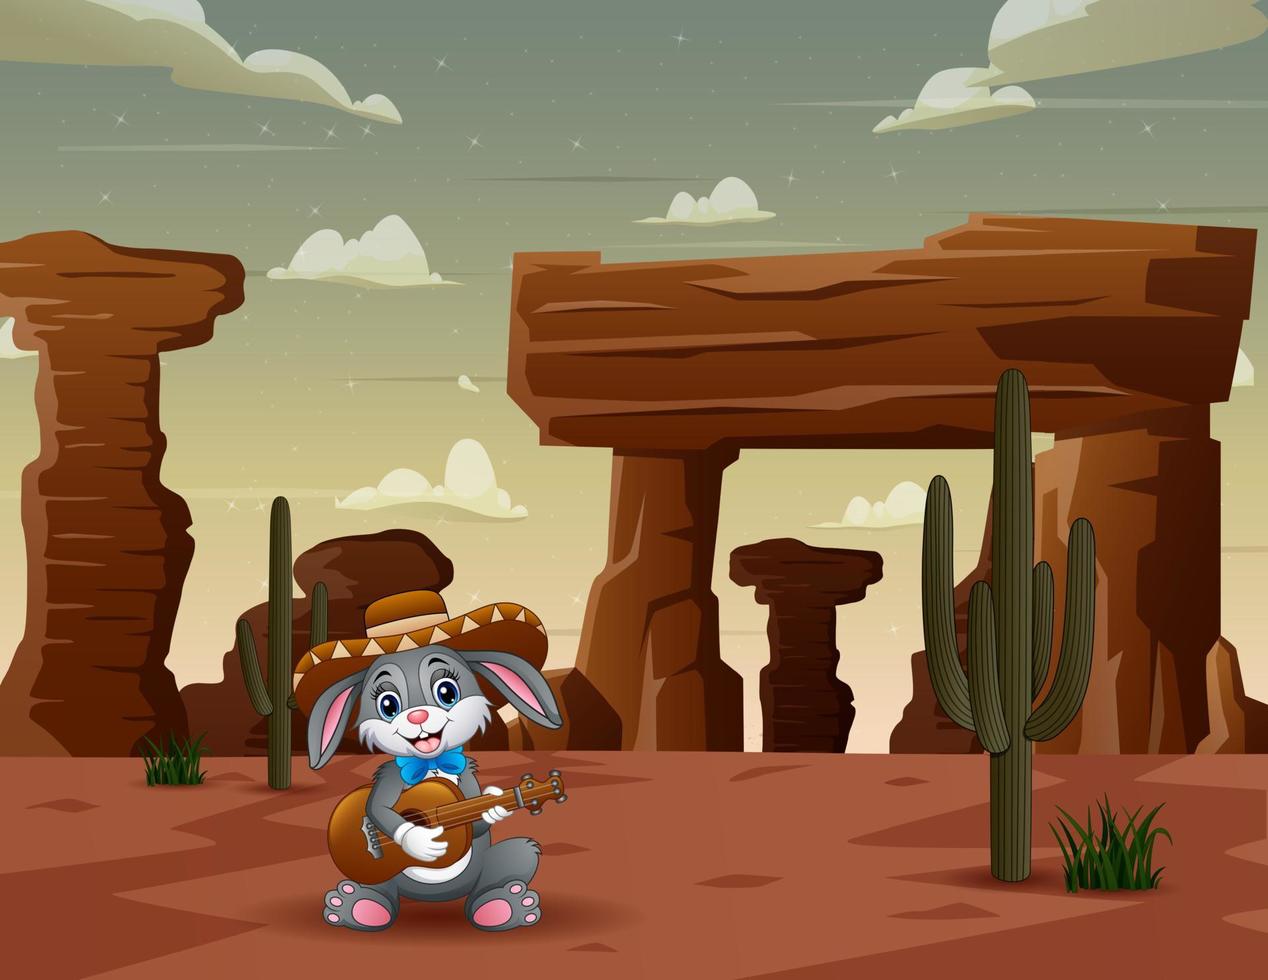 Mexican bunny playing guitar and wearing a sombrero in desert vector